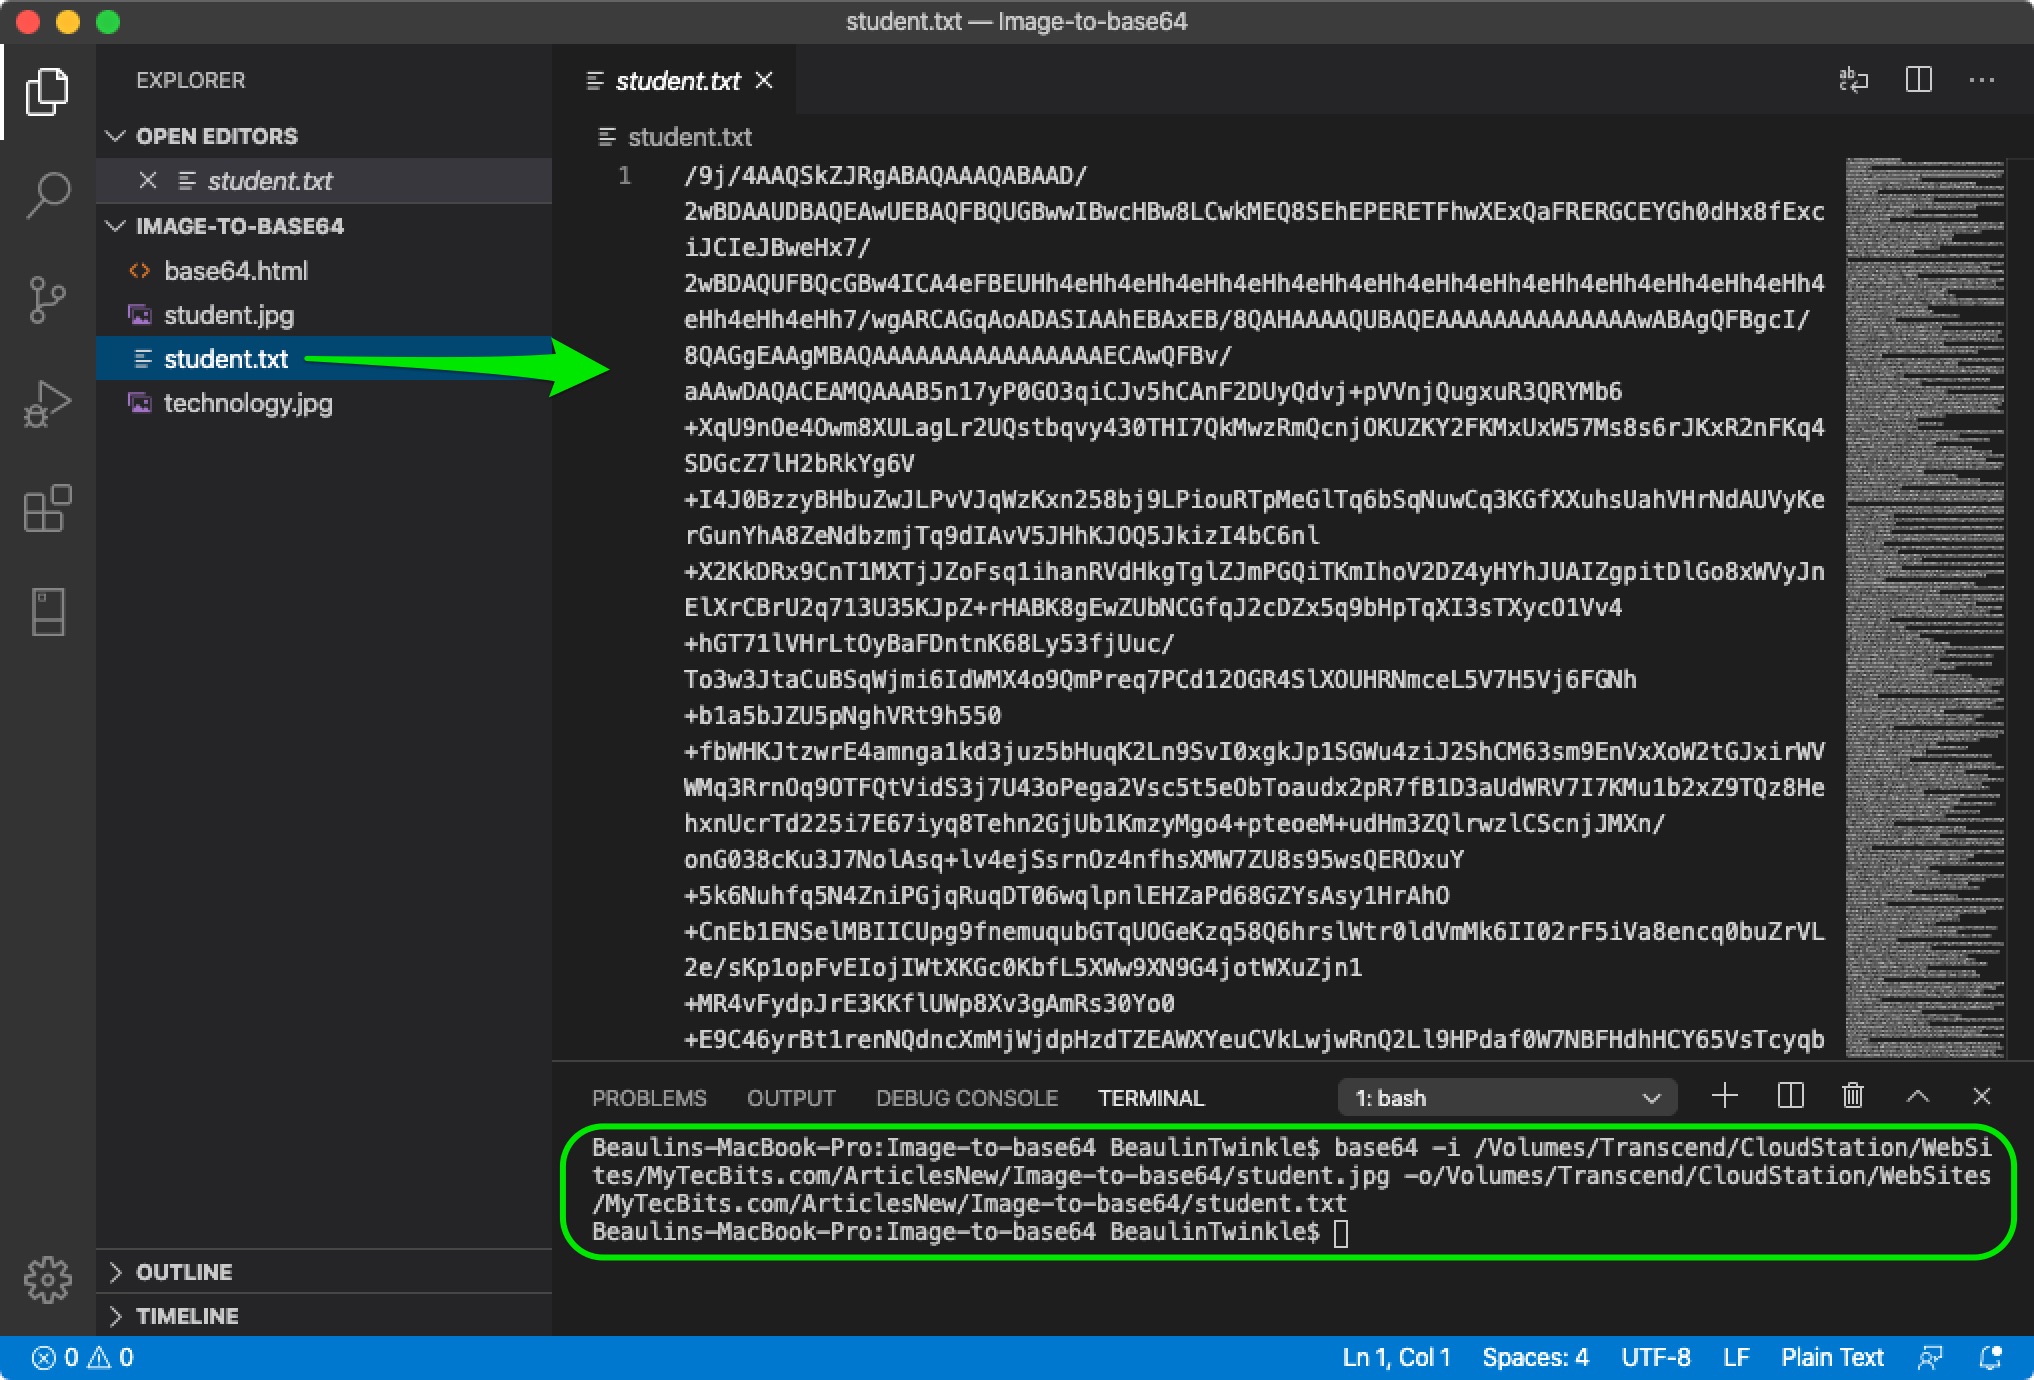 Convert Image to base64 in Visual Studio Code on macOS